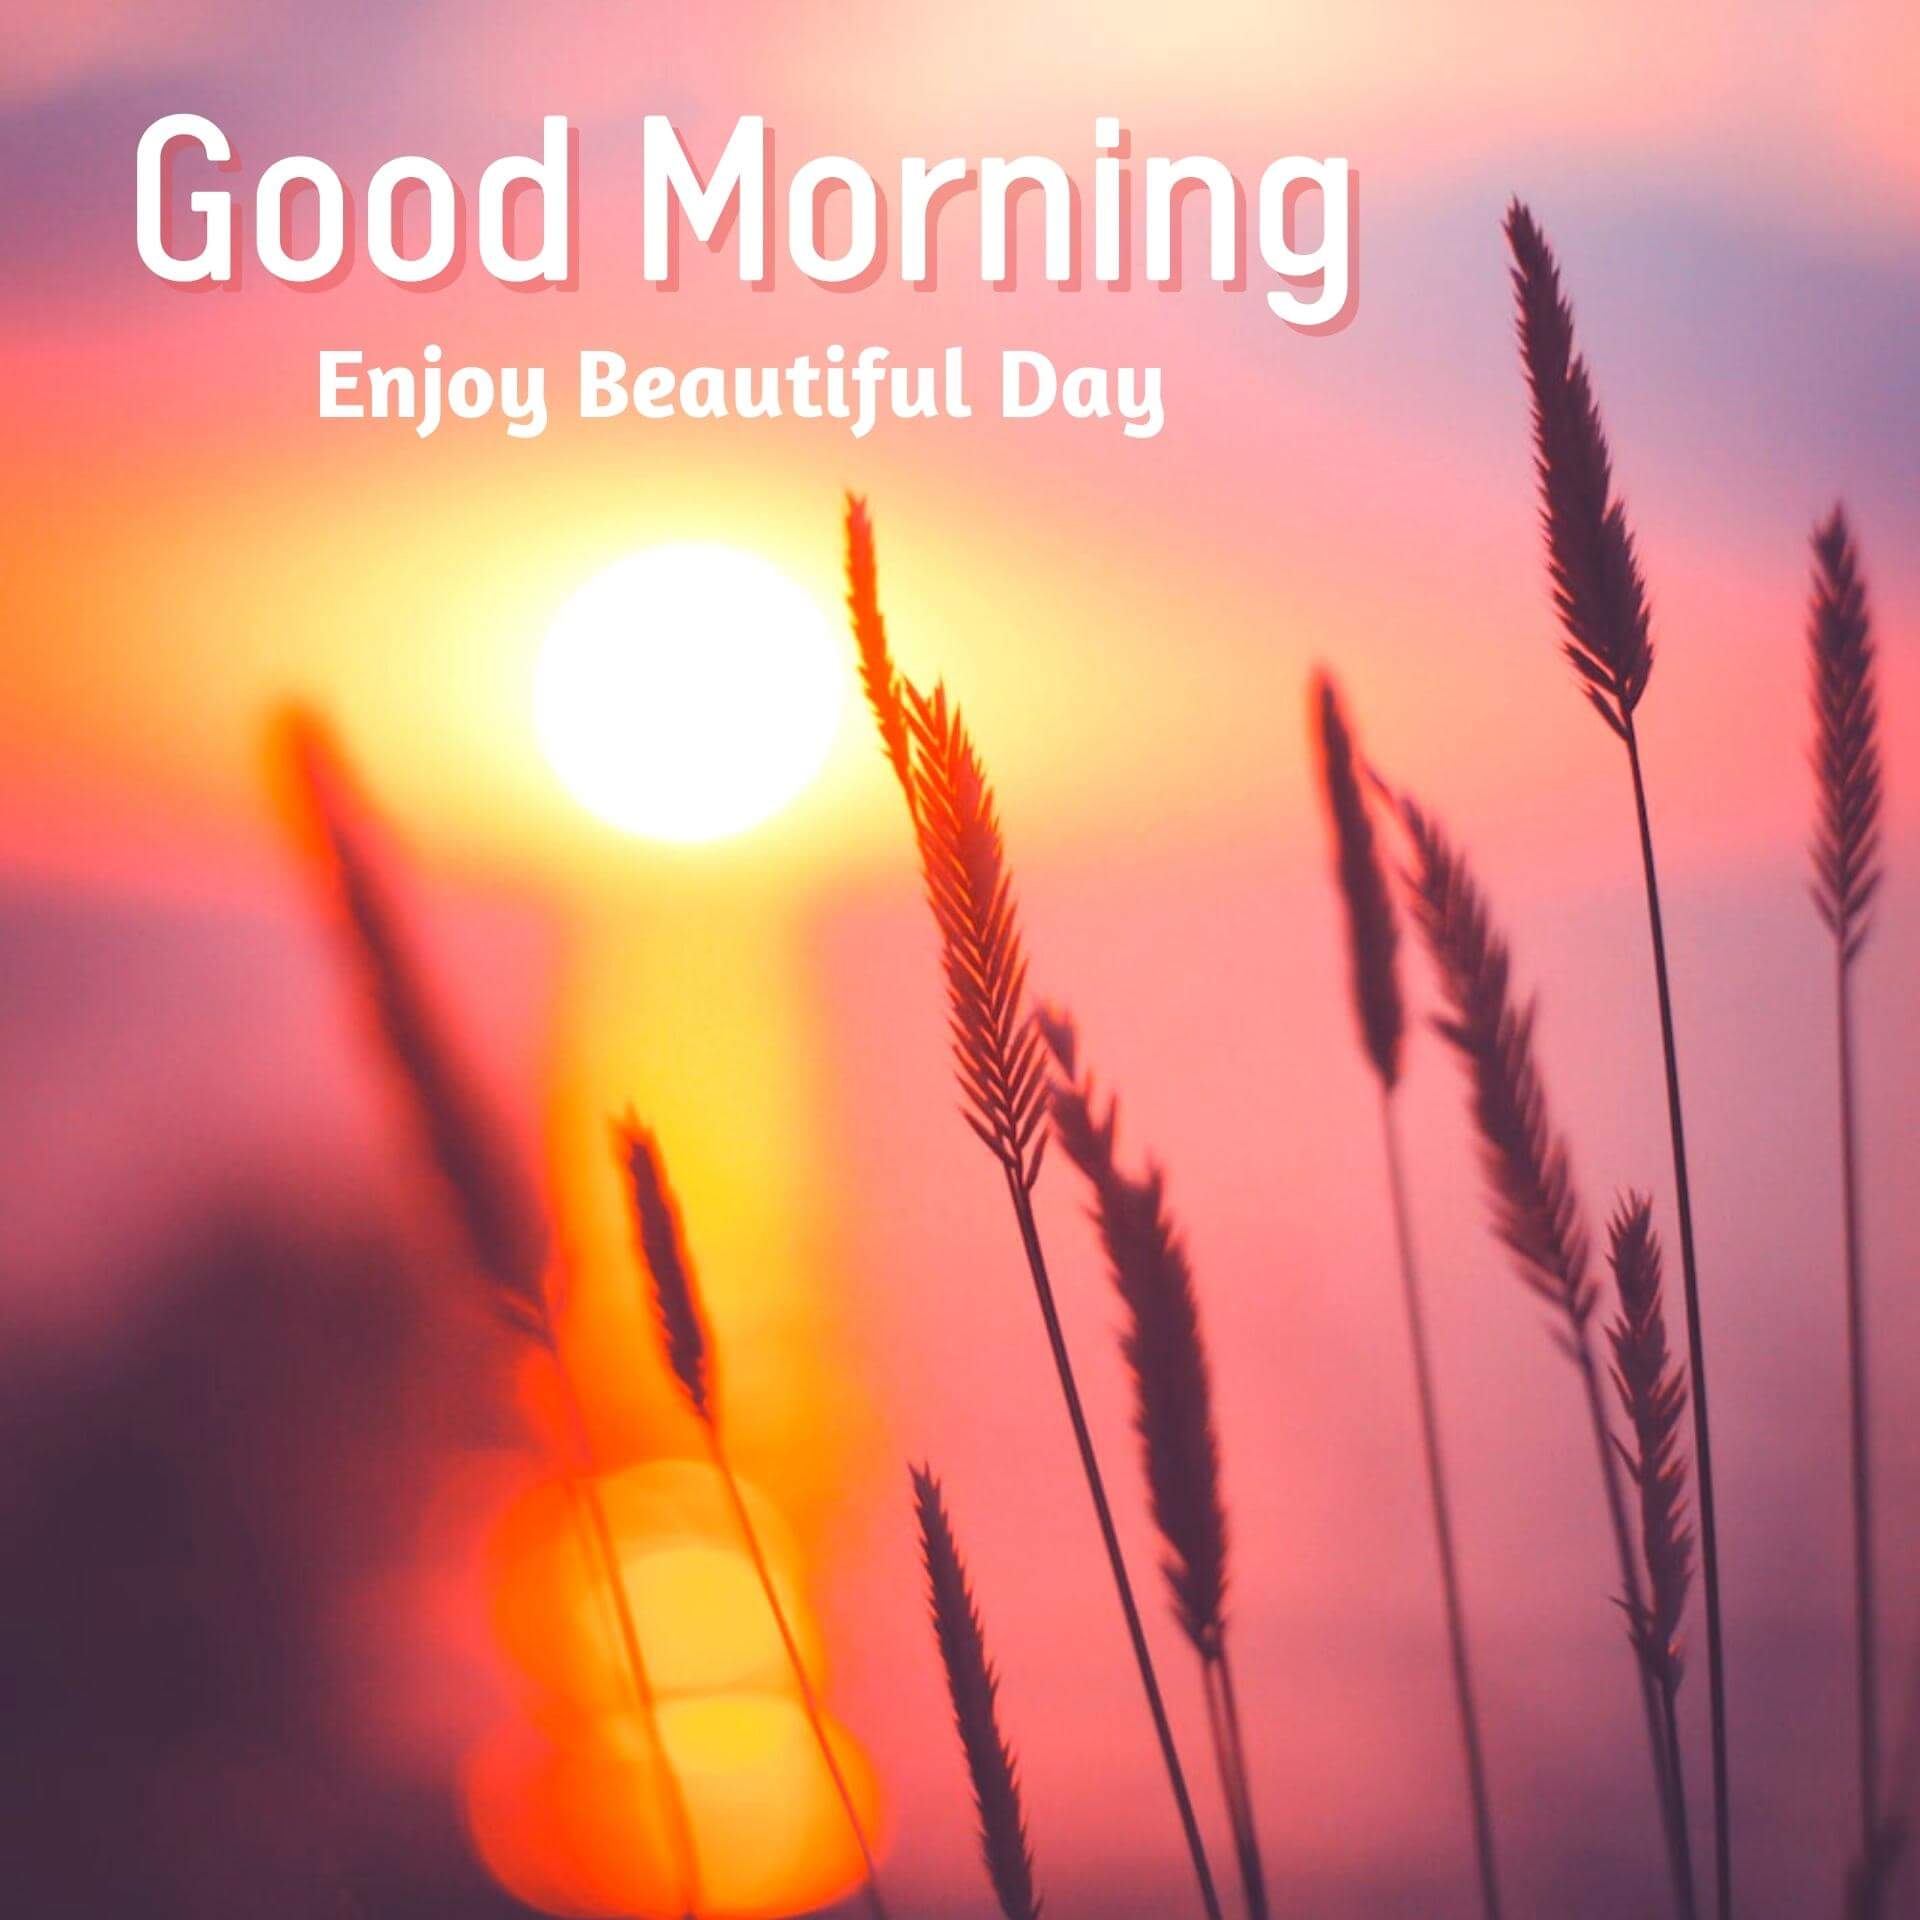 goodmorning wishes images download